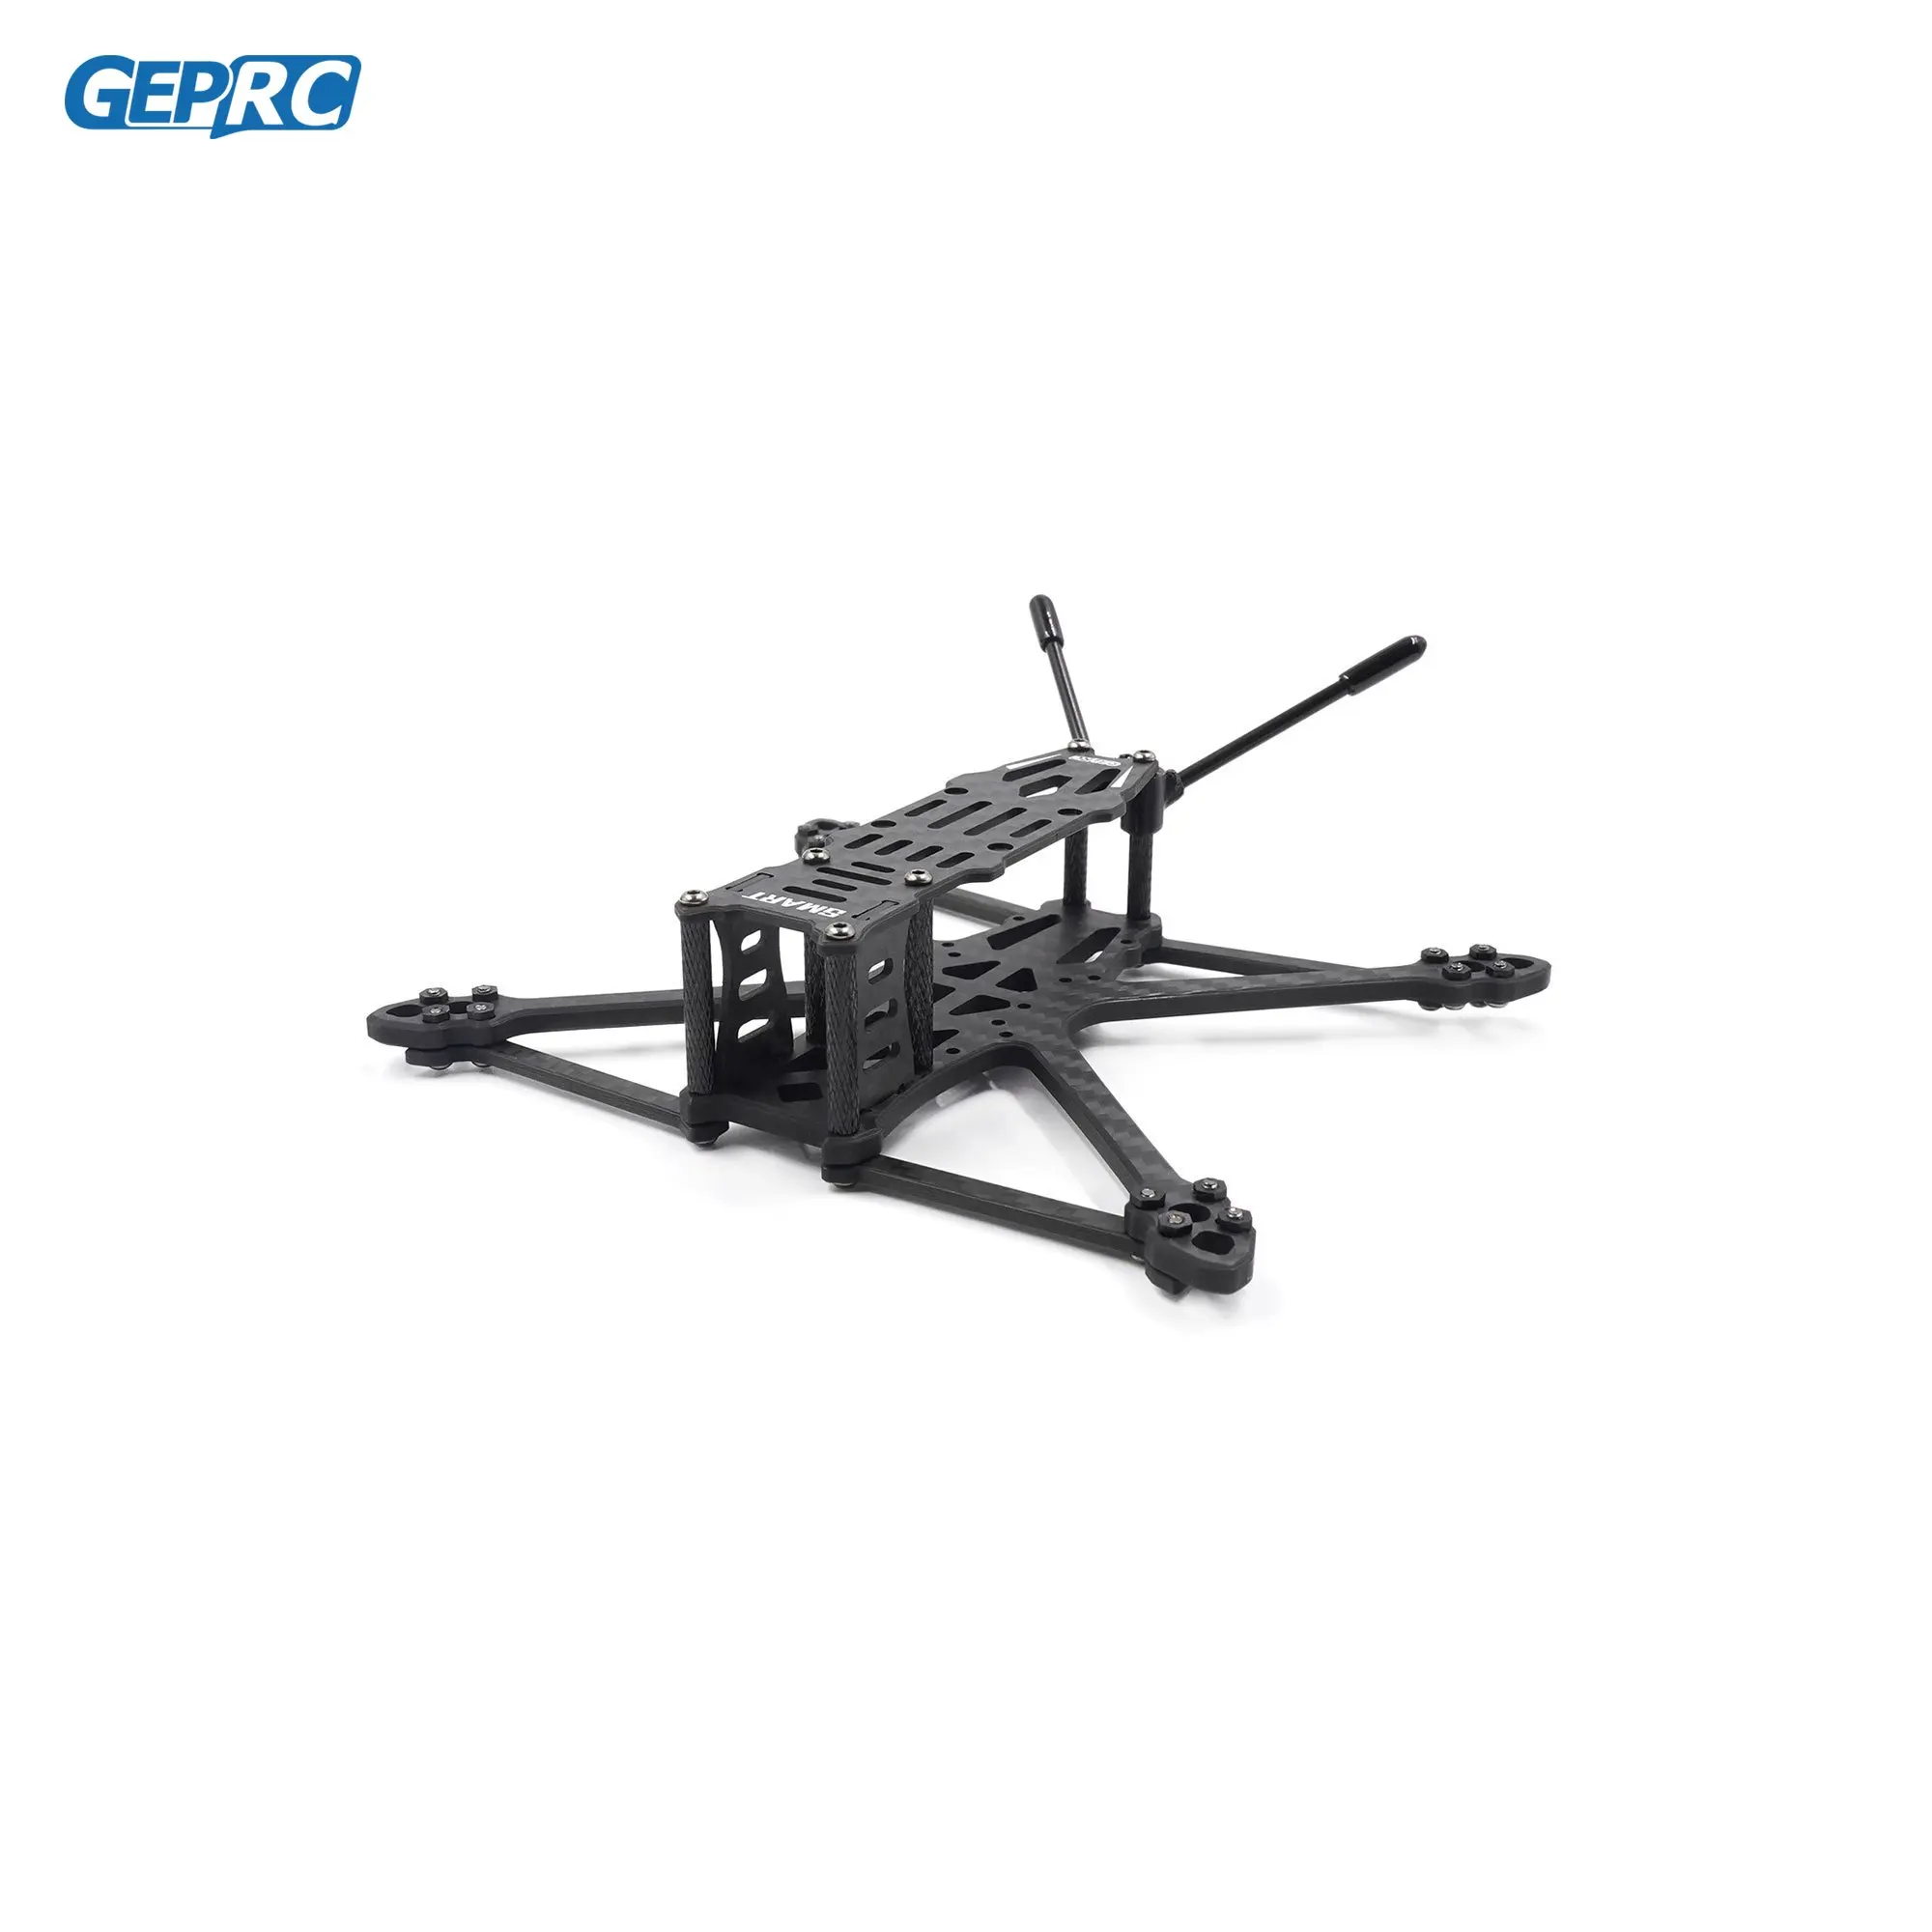 GEPRC GEP-ST35 Frame Suitable For Smart 35 Series Drone Carbon Fiber Frame For RC FPV Quadcopter Replacement Accessories Parts